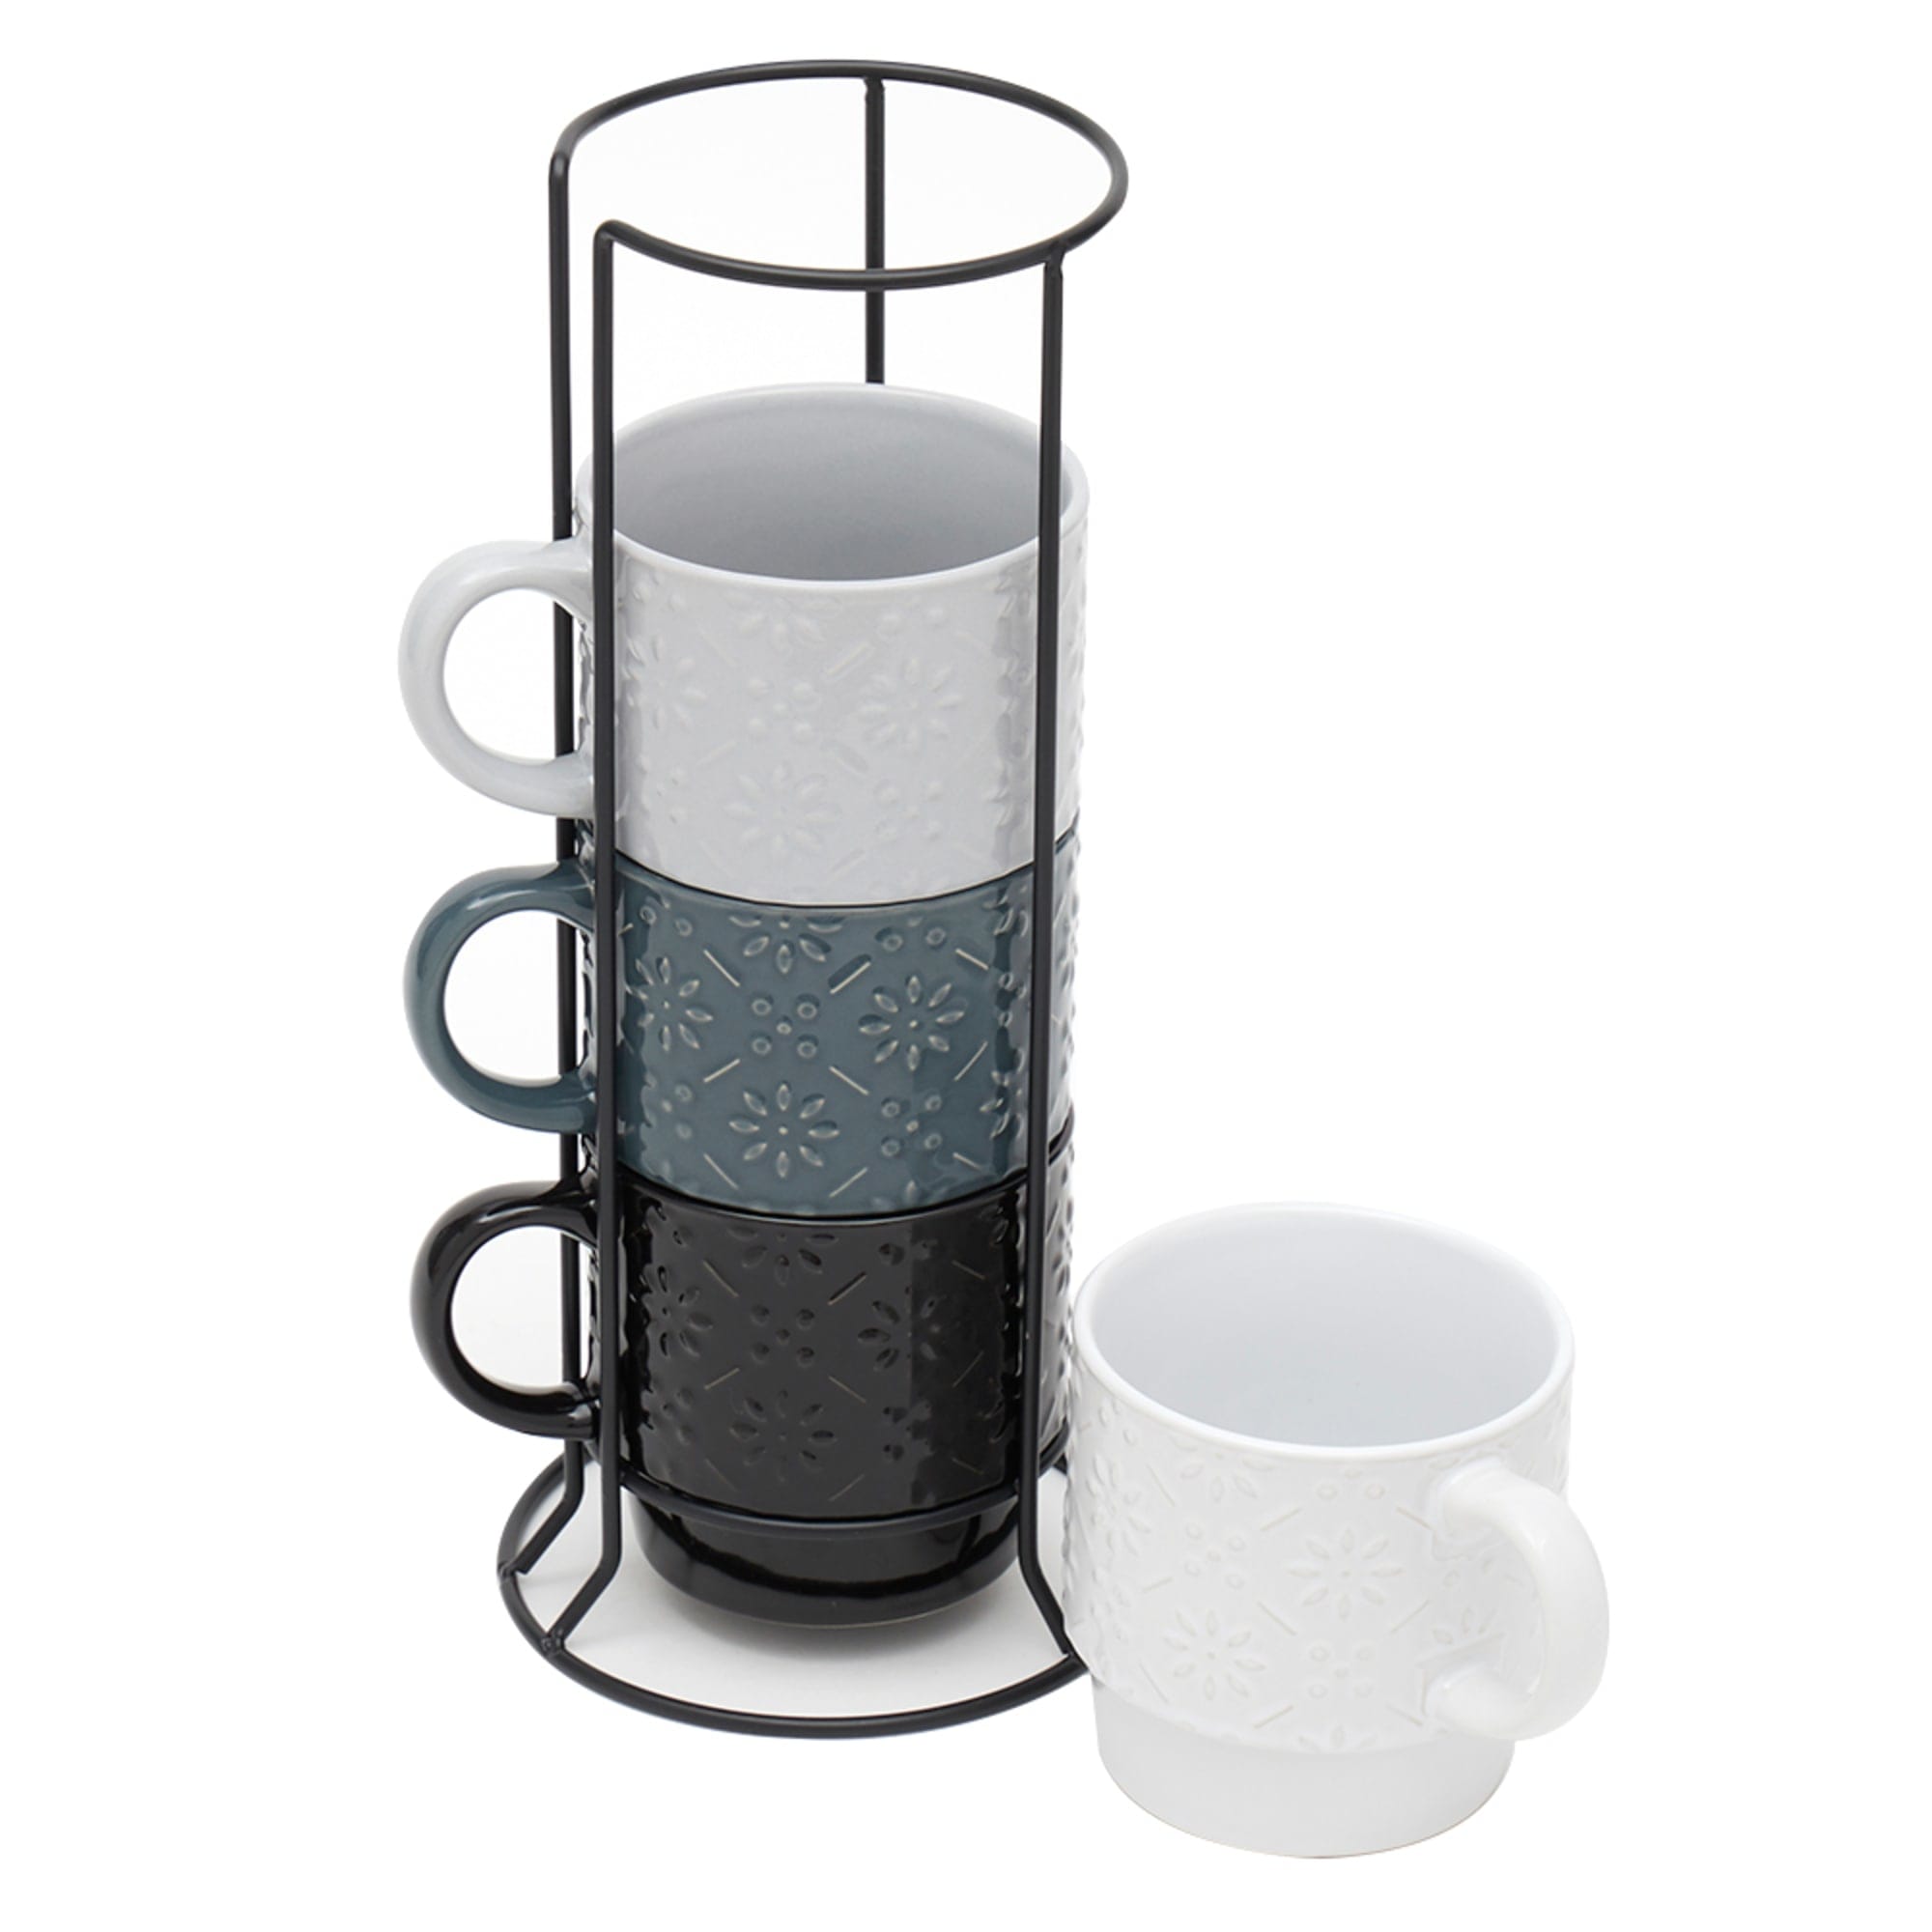 Home Basics Embossed Daisy 4 Piece Stackable Mug Set with Stand
 $10.00 EACH, CASE PACK OF 6